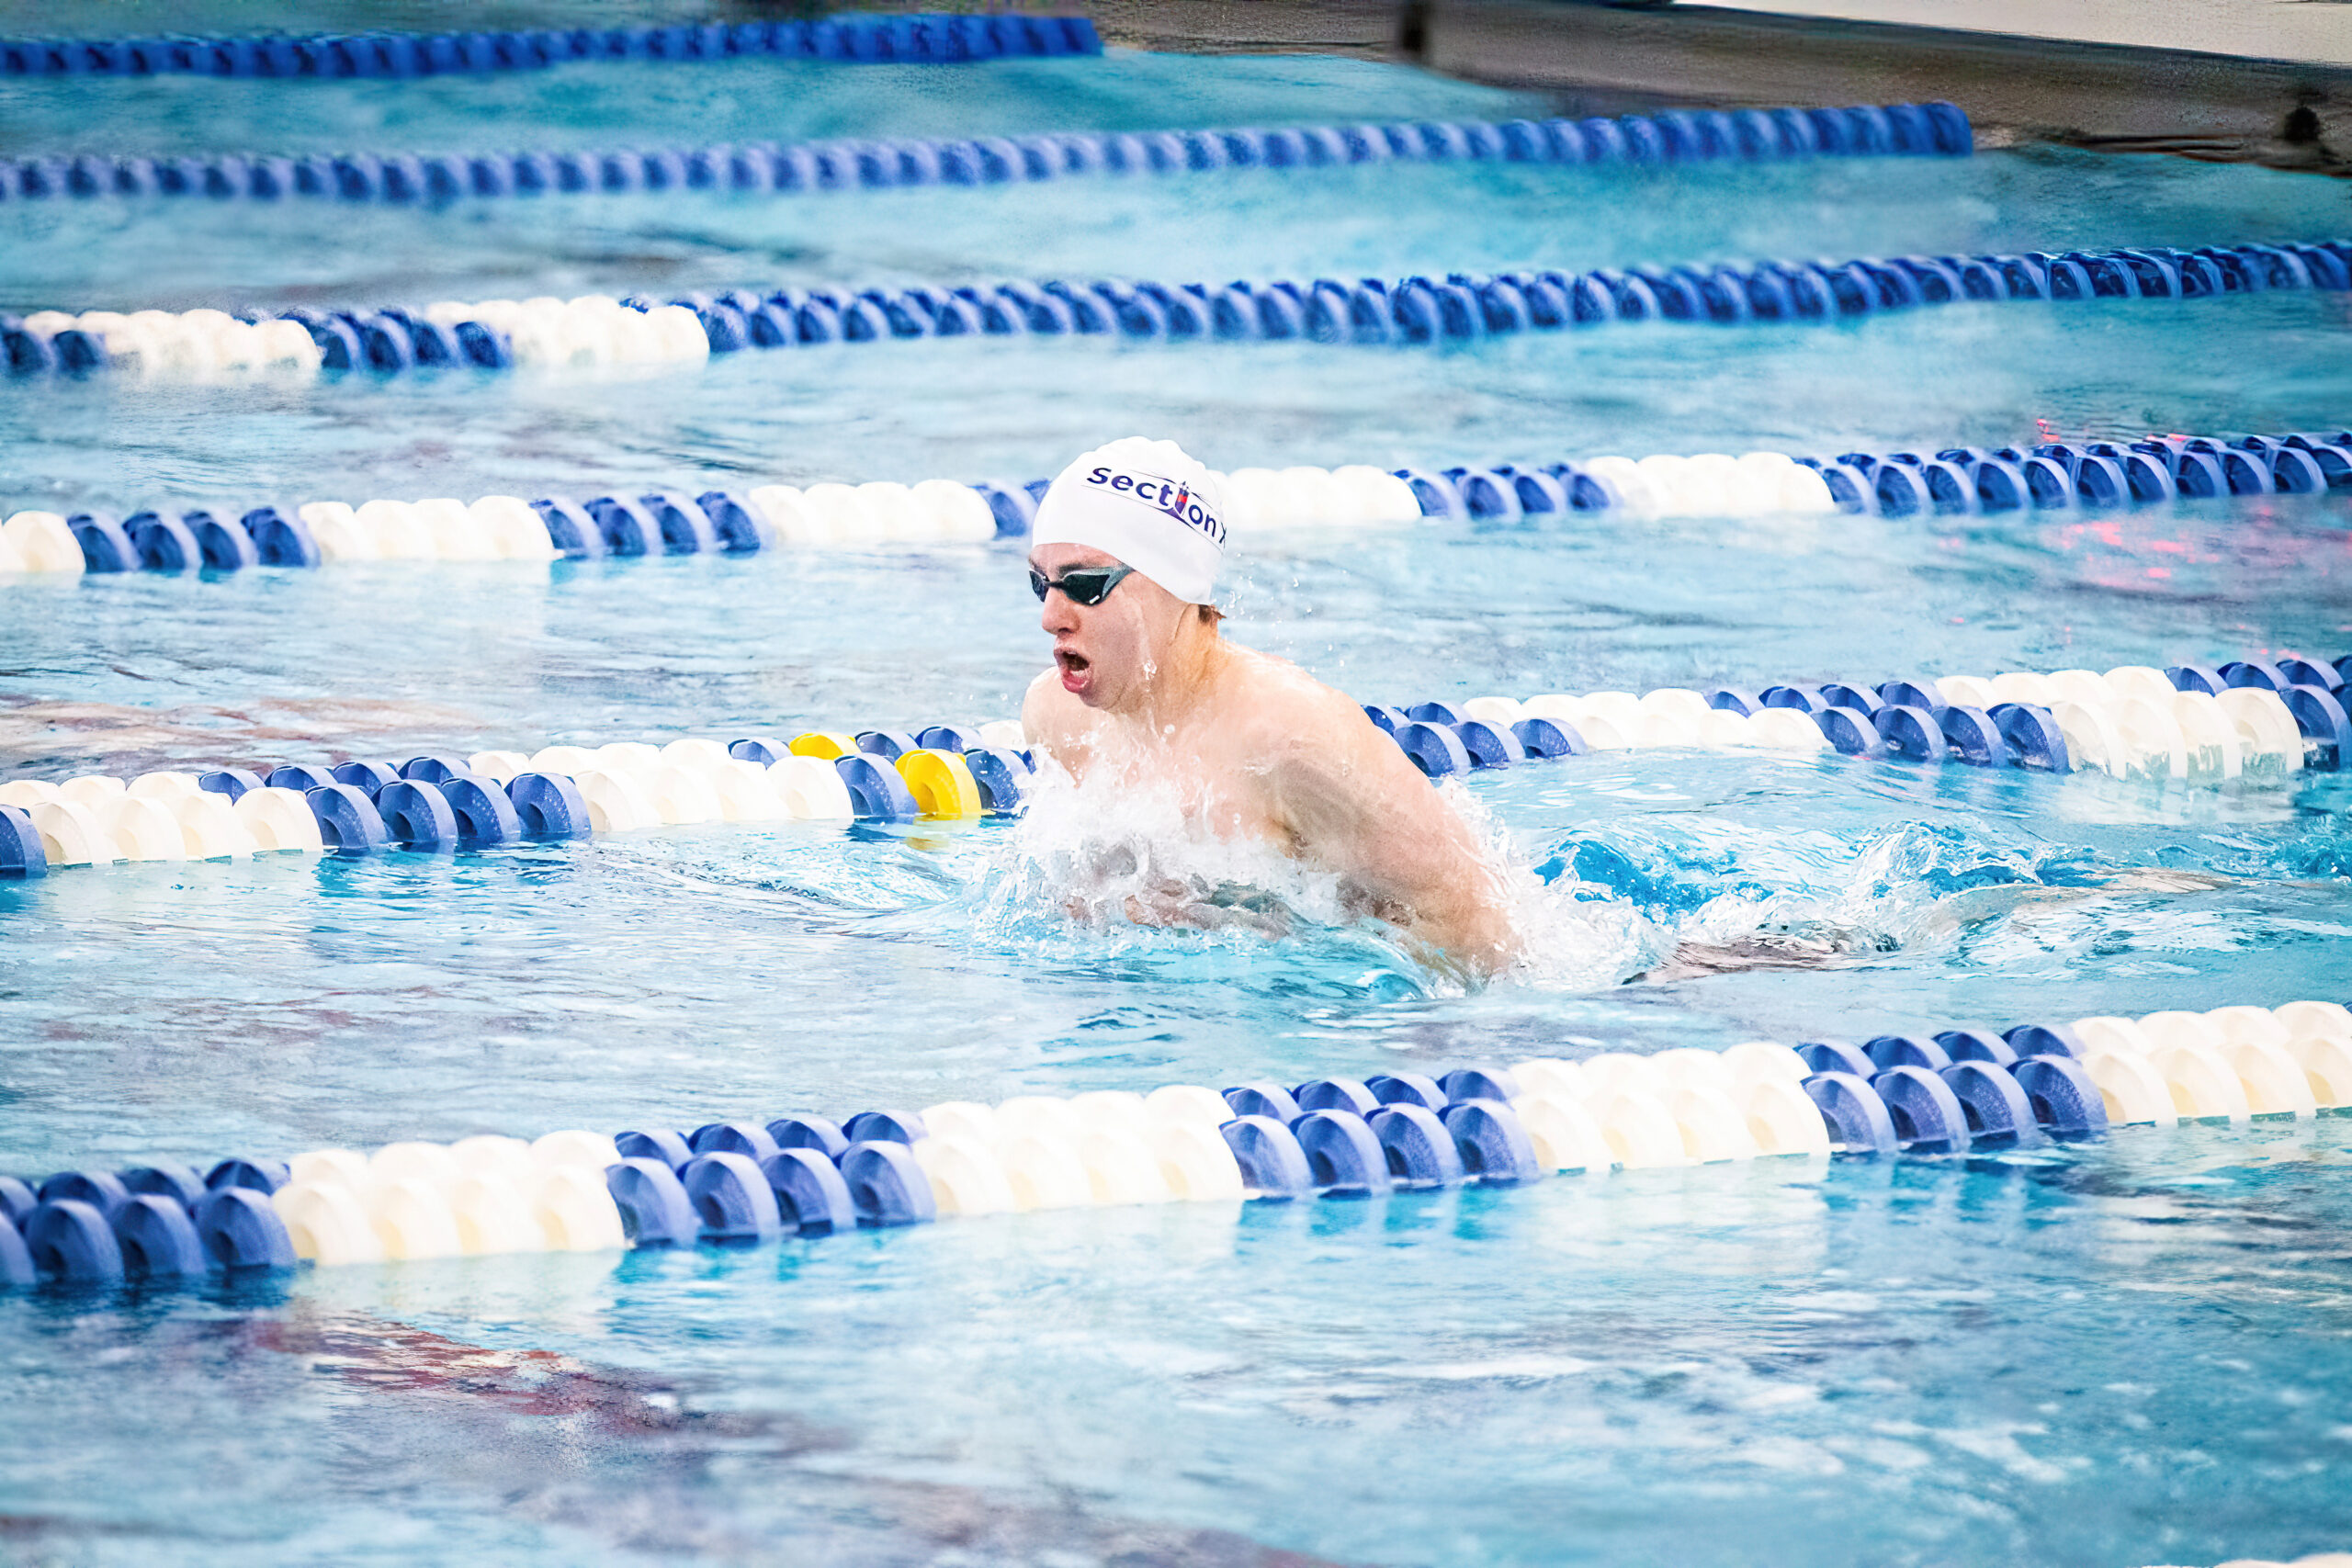 Westhampton Beach junior Max Buchen placed third among public school swimmers and fourth in the federation in the 100-yard breaststroke at the state championships March 3 and 4. DAVID WILLIAMS/BEYOND THE PRINT